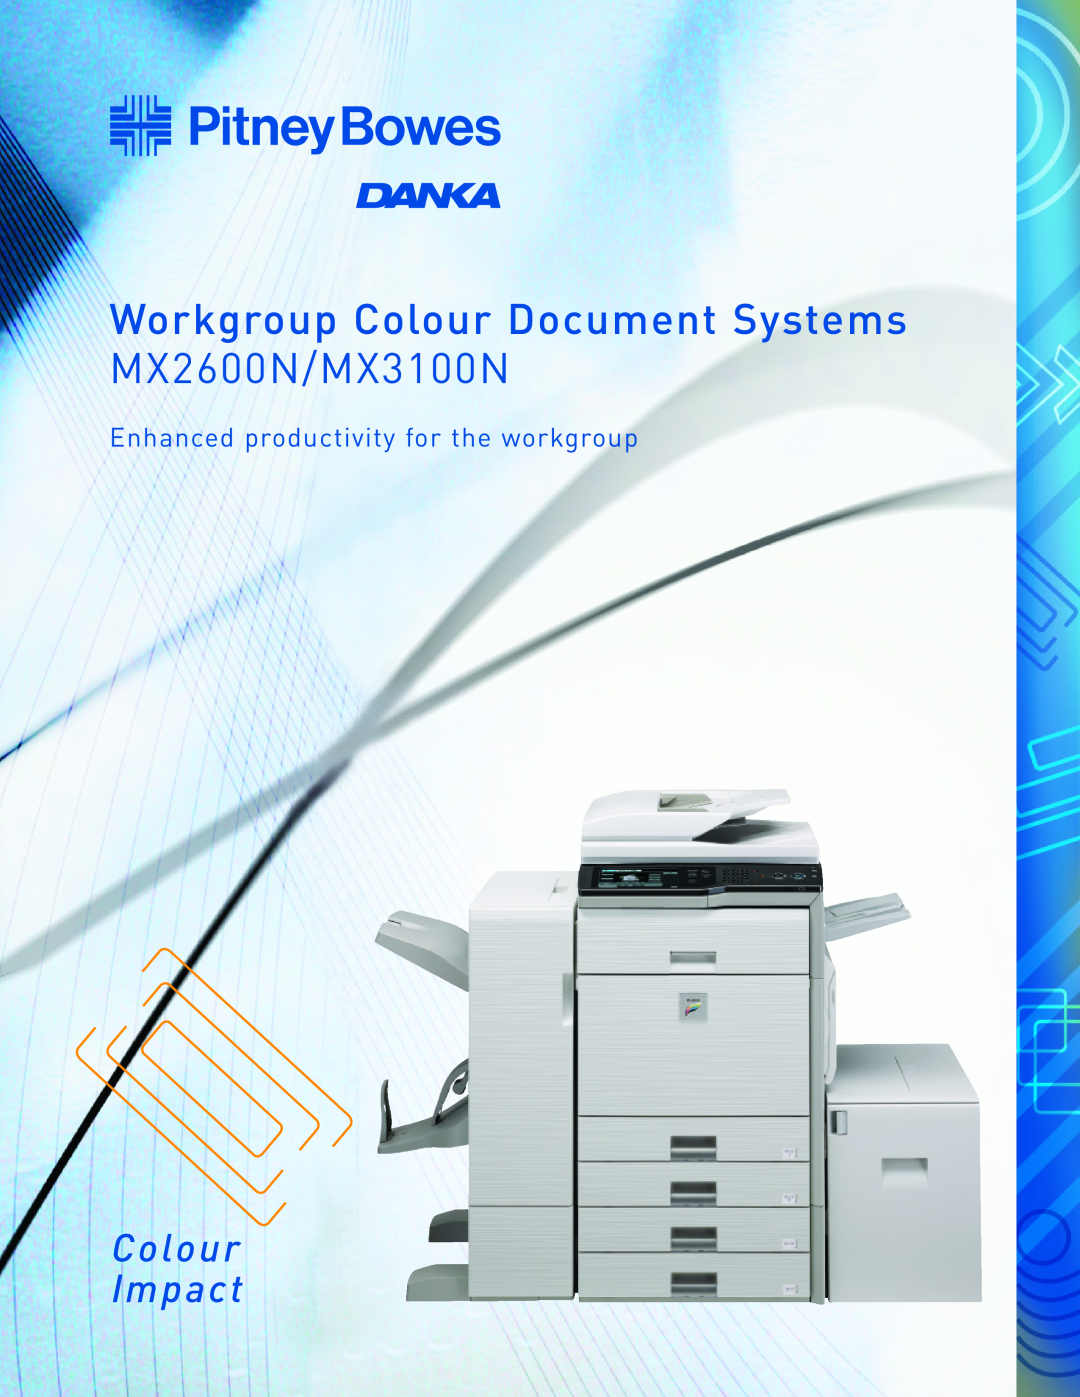 Pitney Bowes manual Workgroup Colour Document Systems MX2600N/MX3100N, Colour Impact 